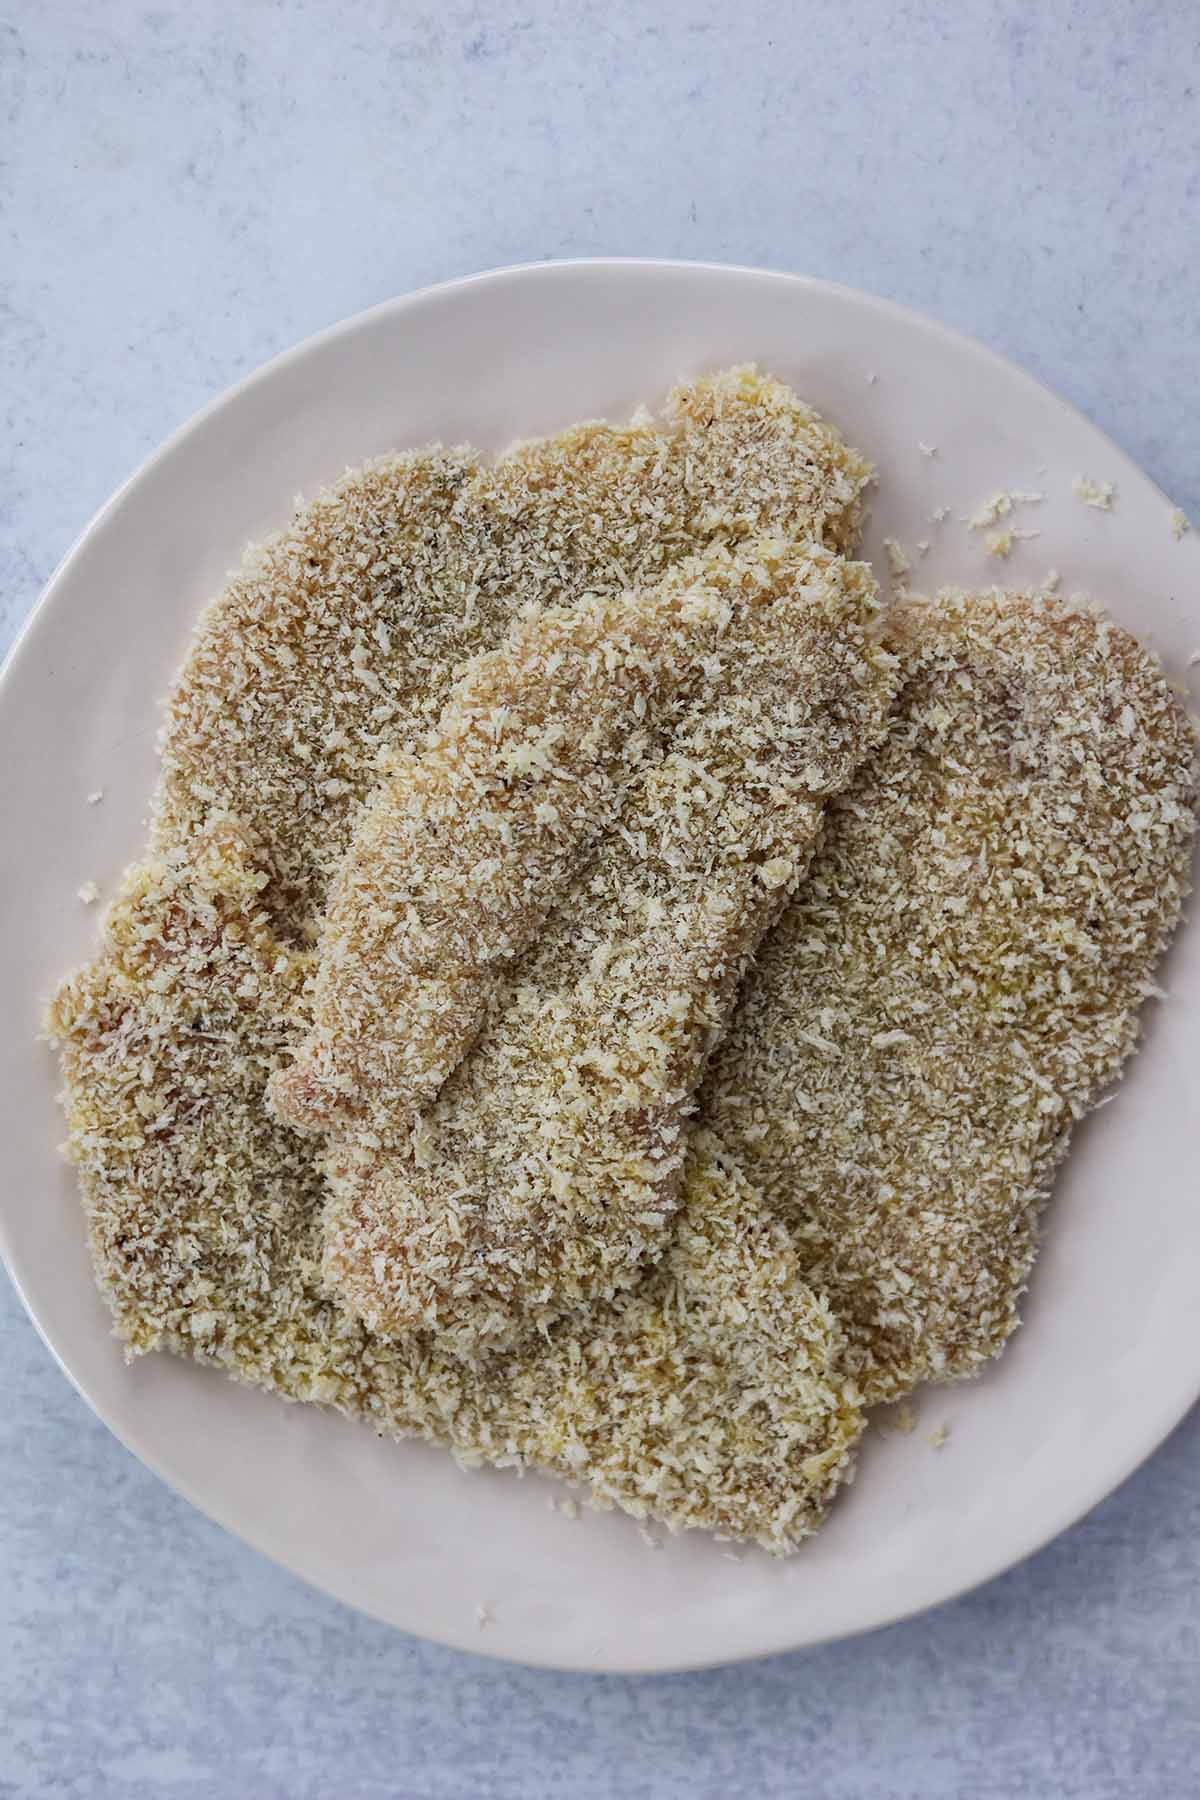 four raw chicken breasts coated in panko breadcrumbs.